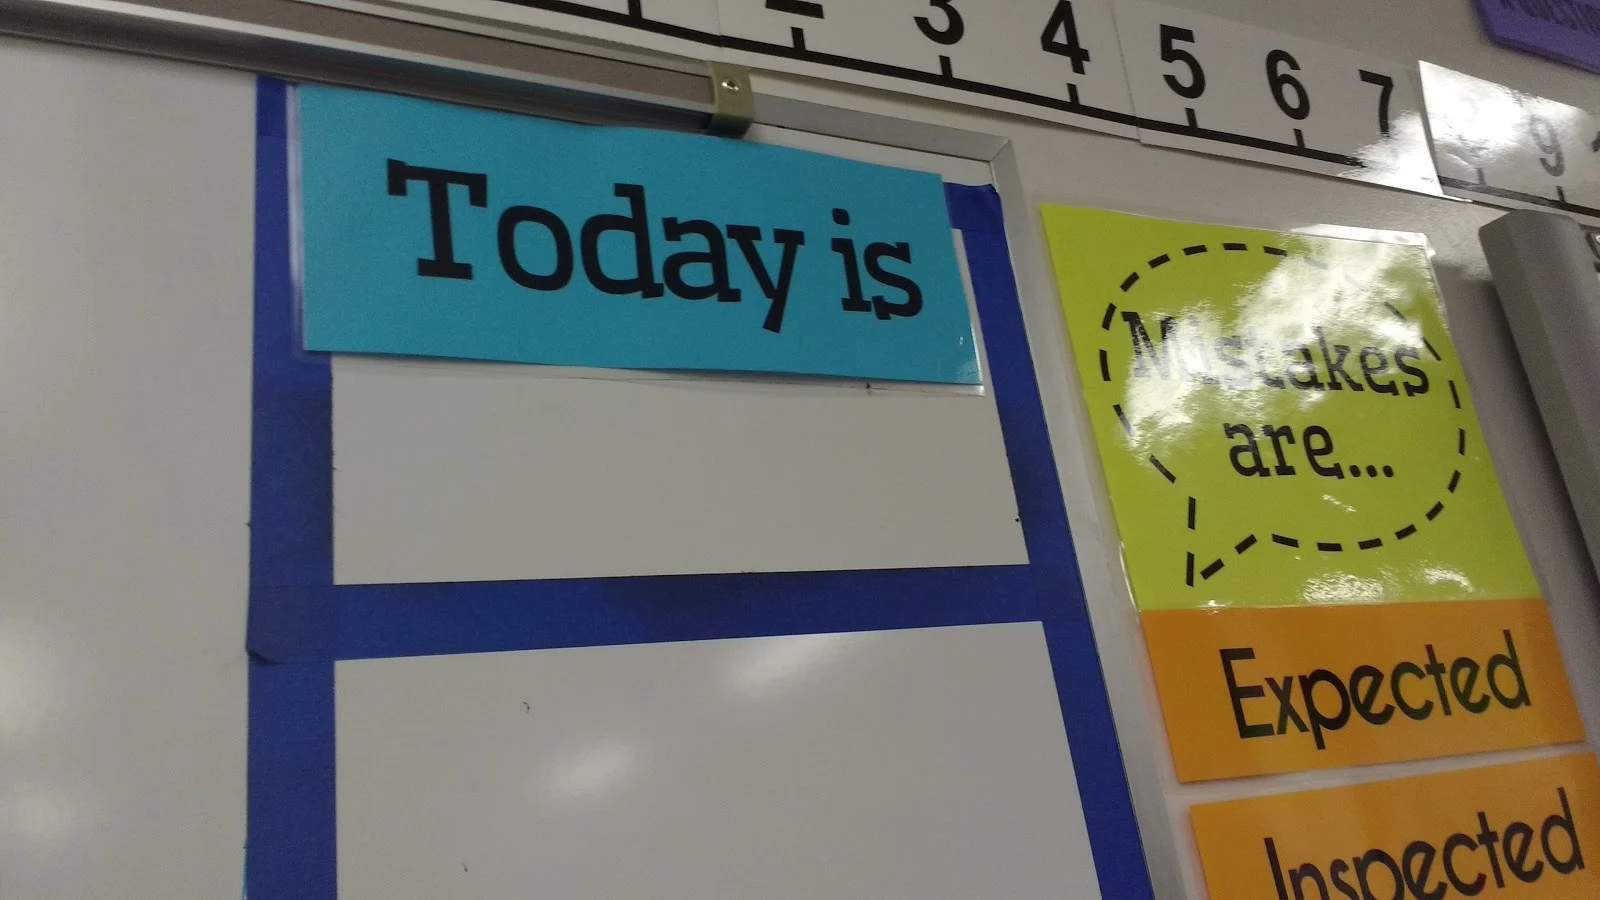 Today is poster high school math classroom decorations 